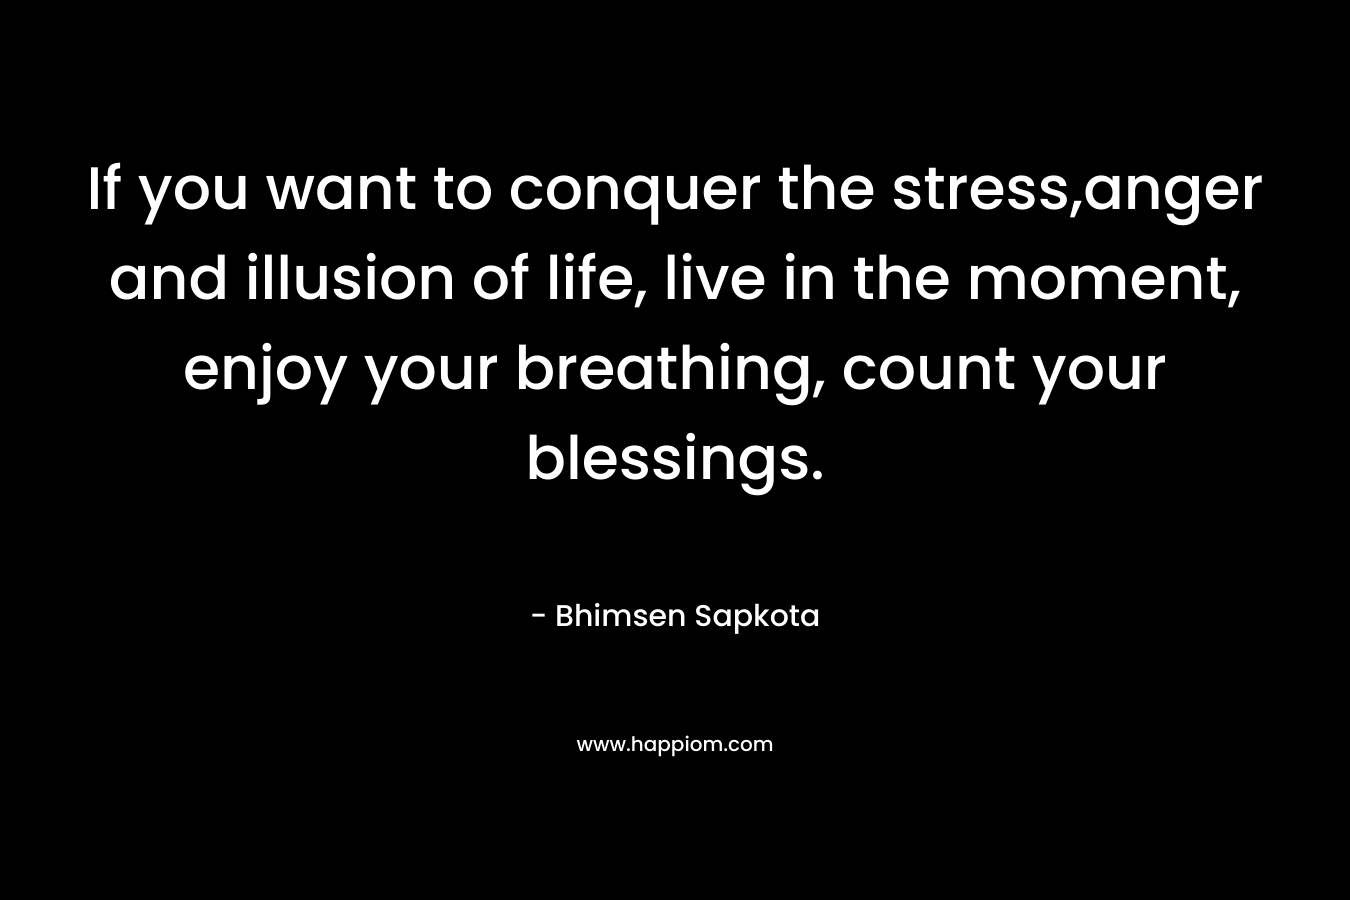 If you want to conquer the stress,anger and illusion of life, live in the moment, enjoy your breathing, count your blessings. – Bhimsen Sapkota